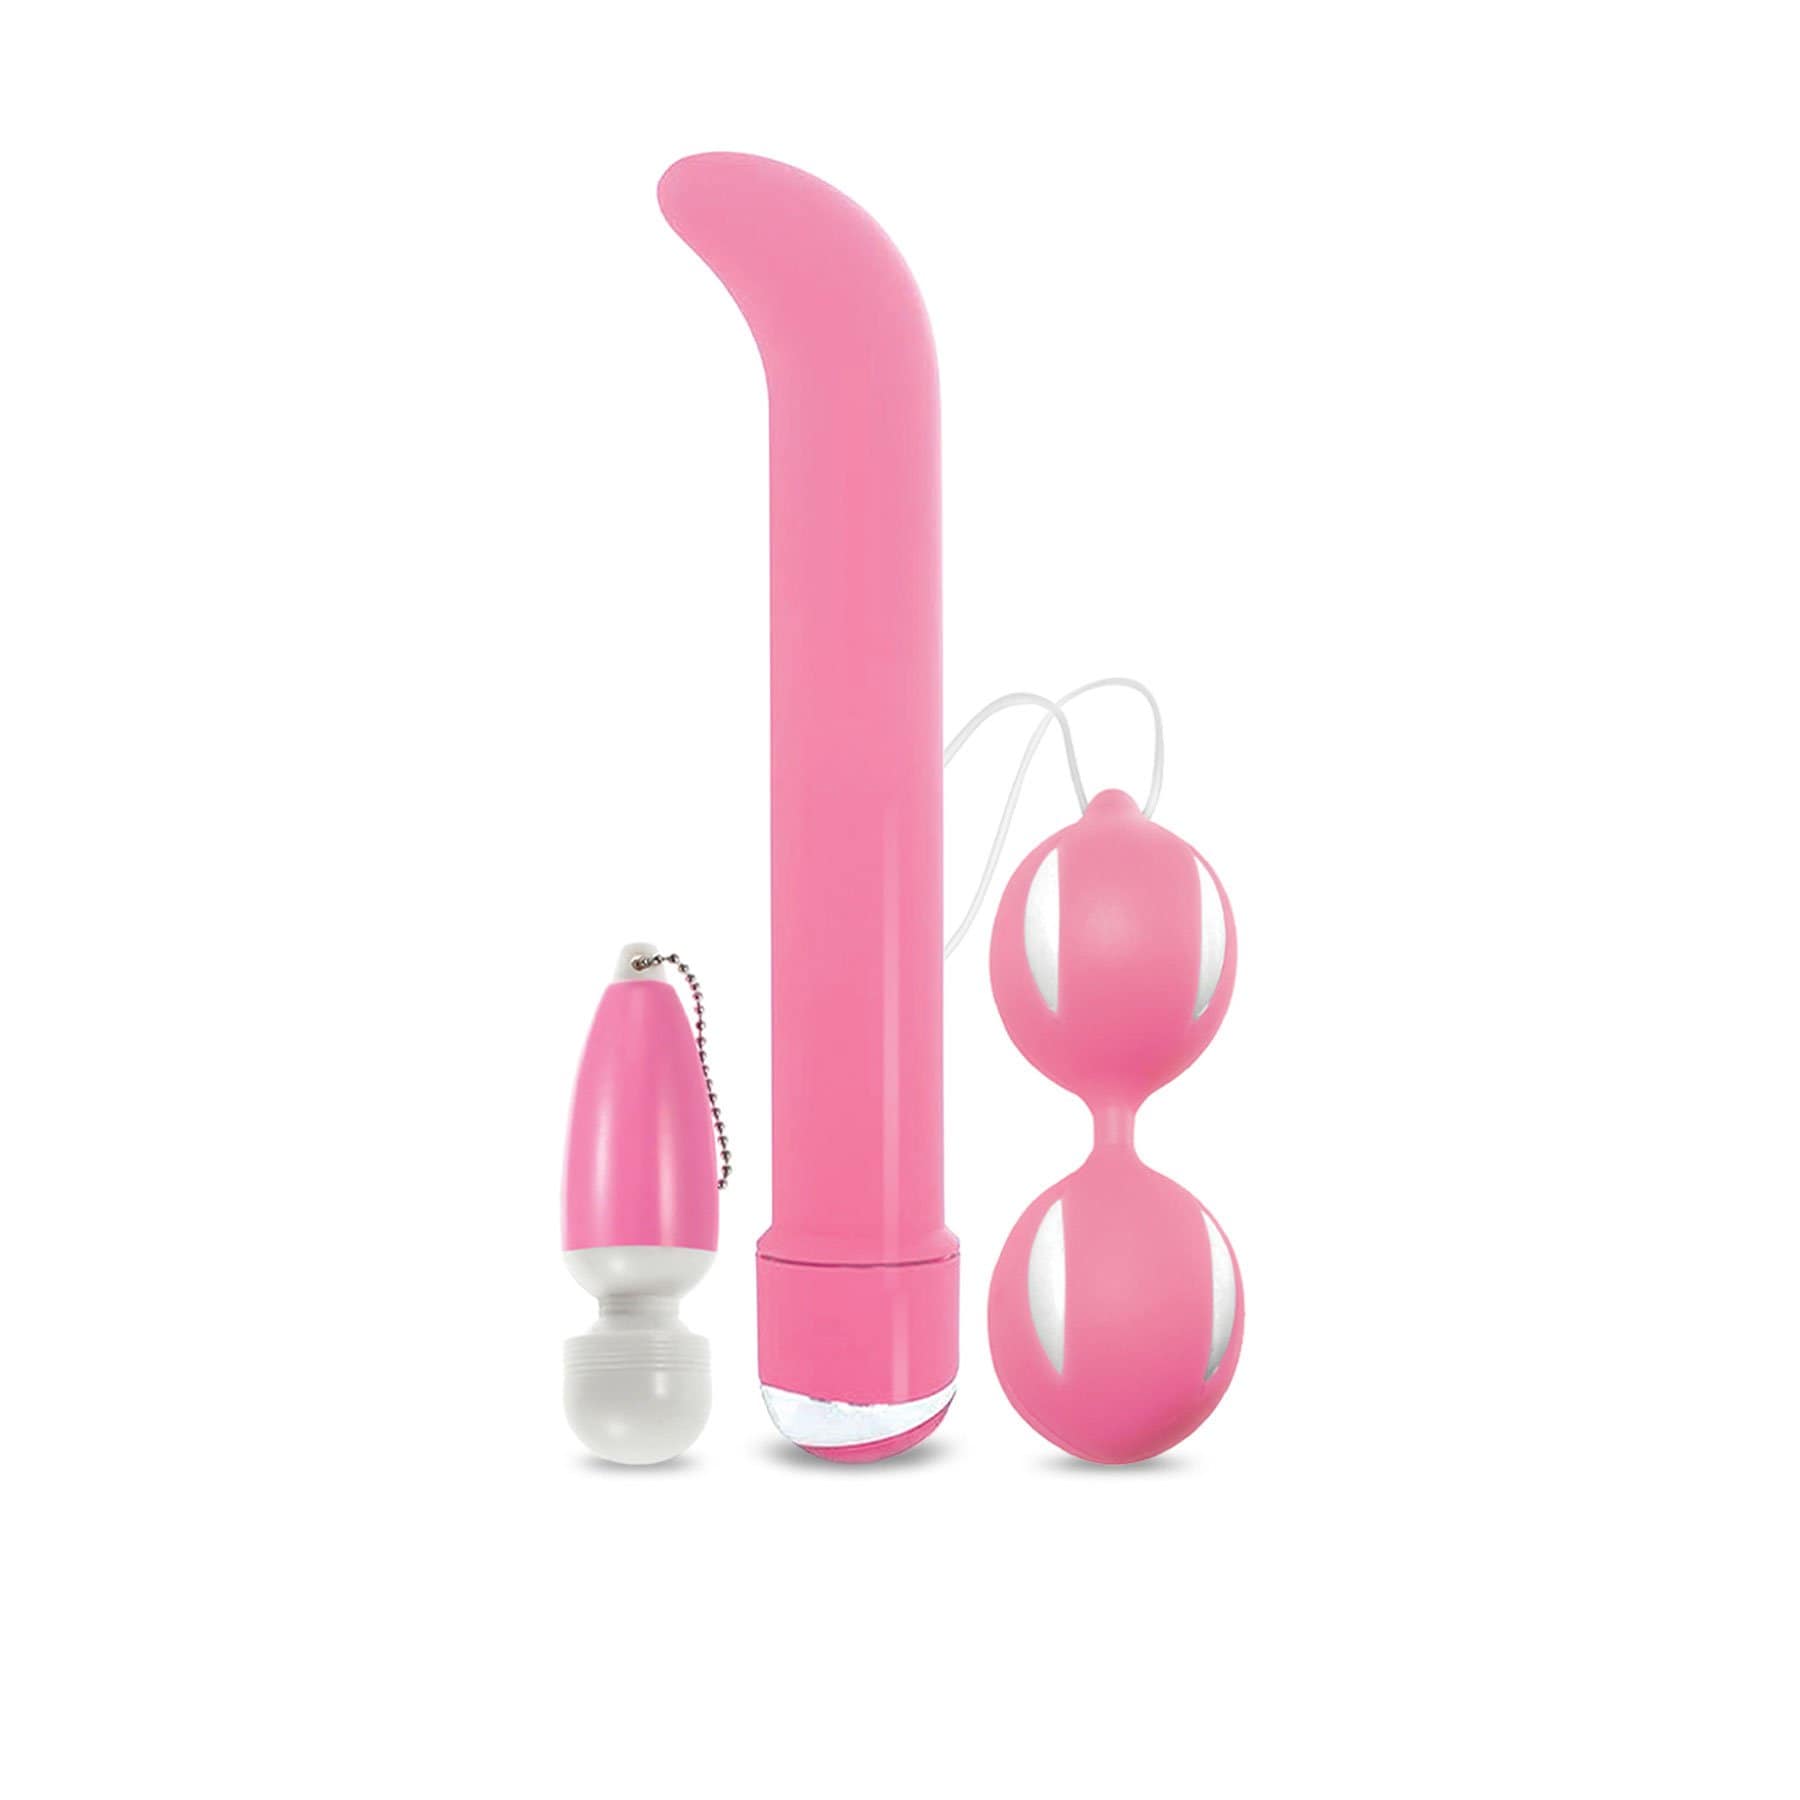 sex toys for women, adult sex toys